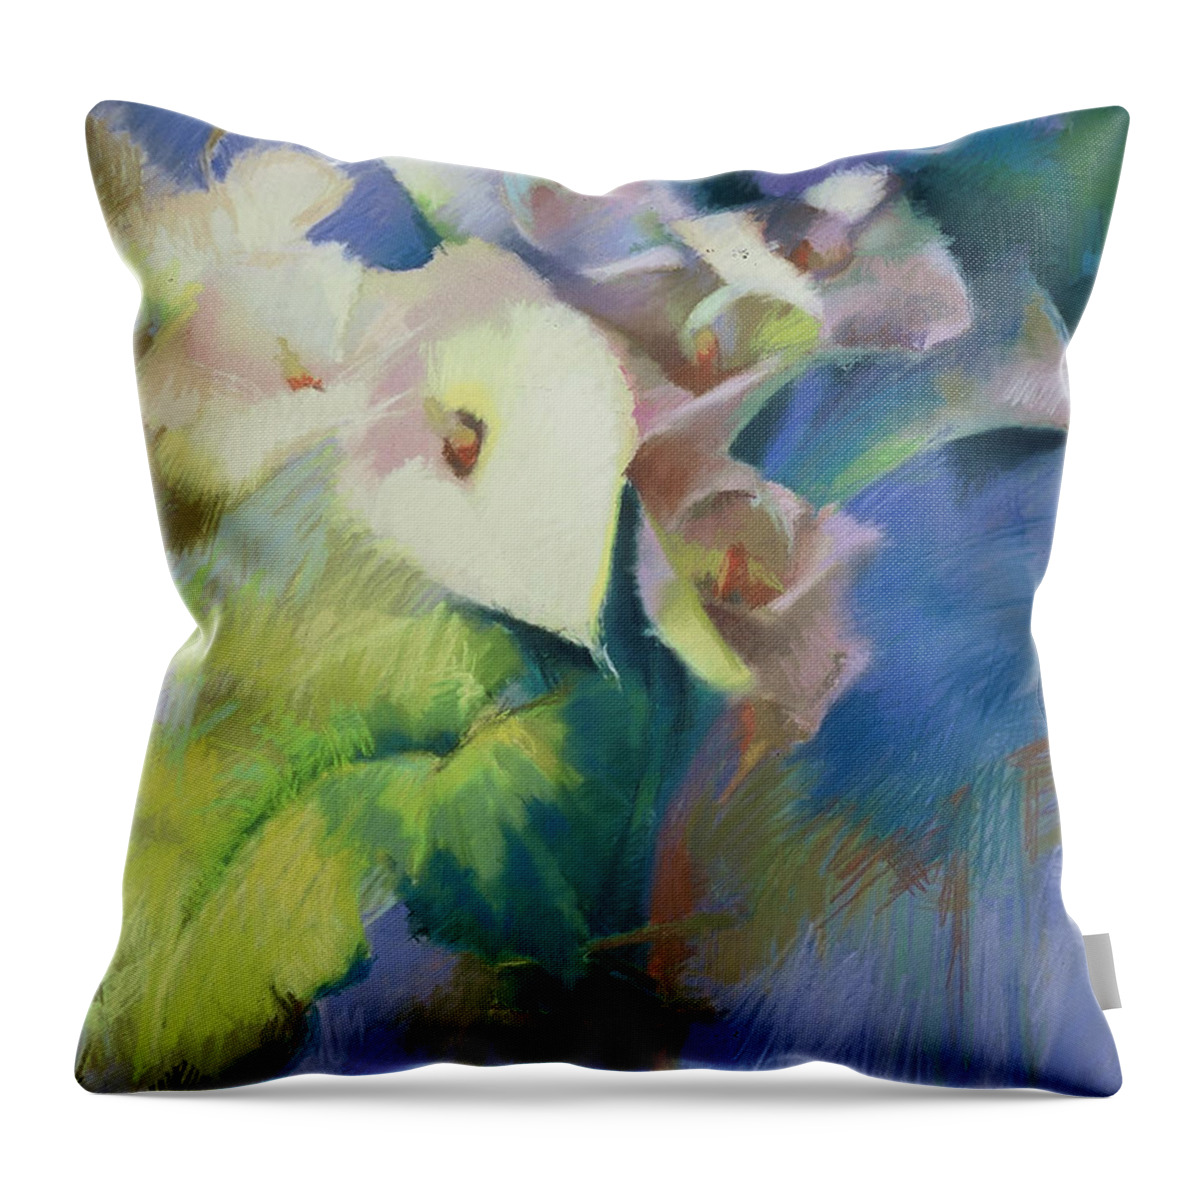 Cala Lilies Throw Pillow featuring the painting Cala Lilies by Cathy Locke